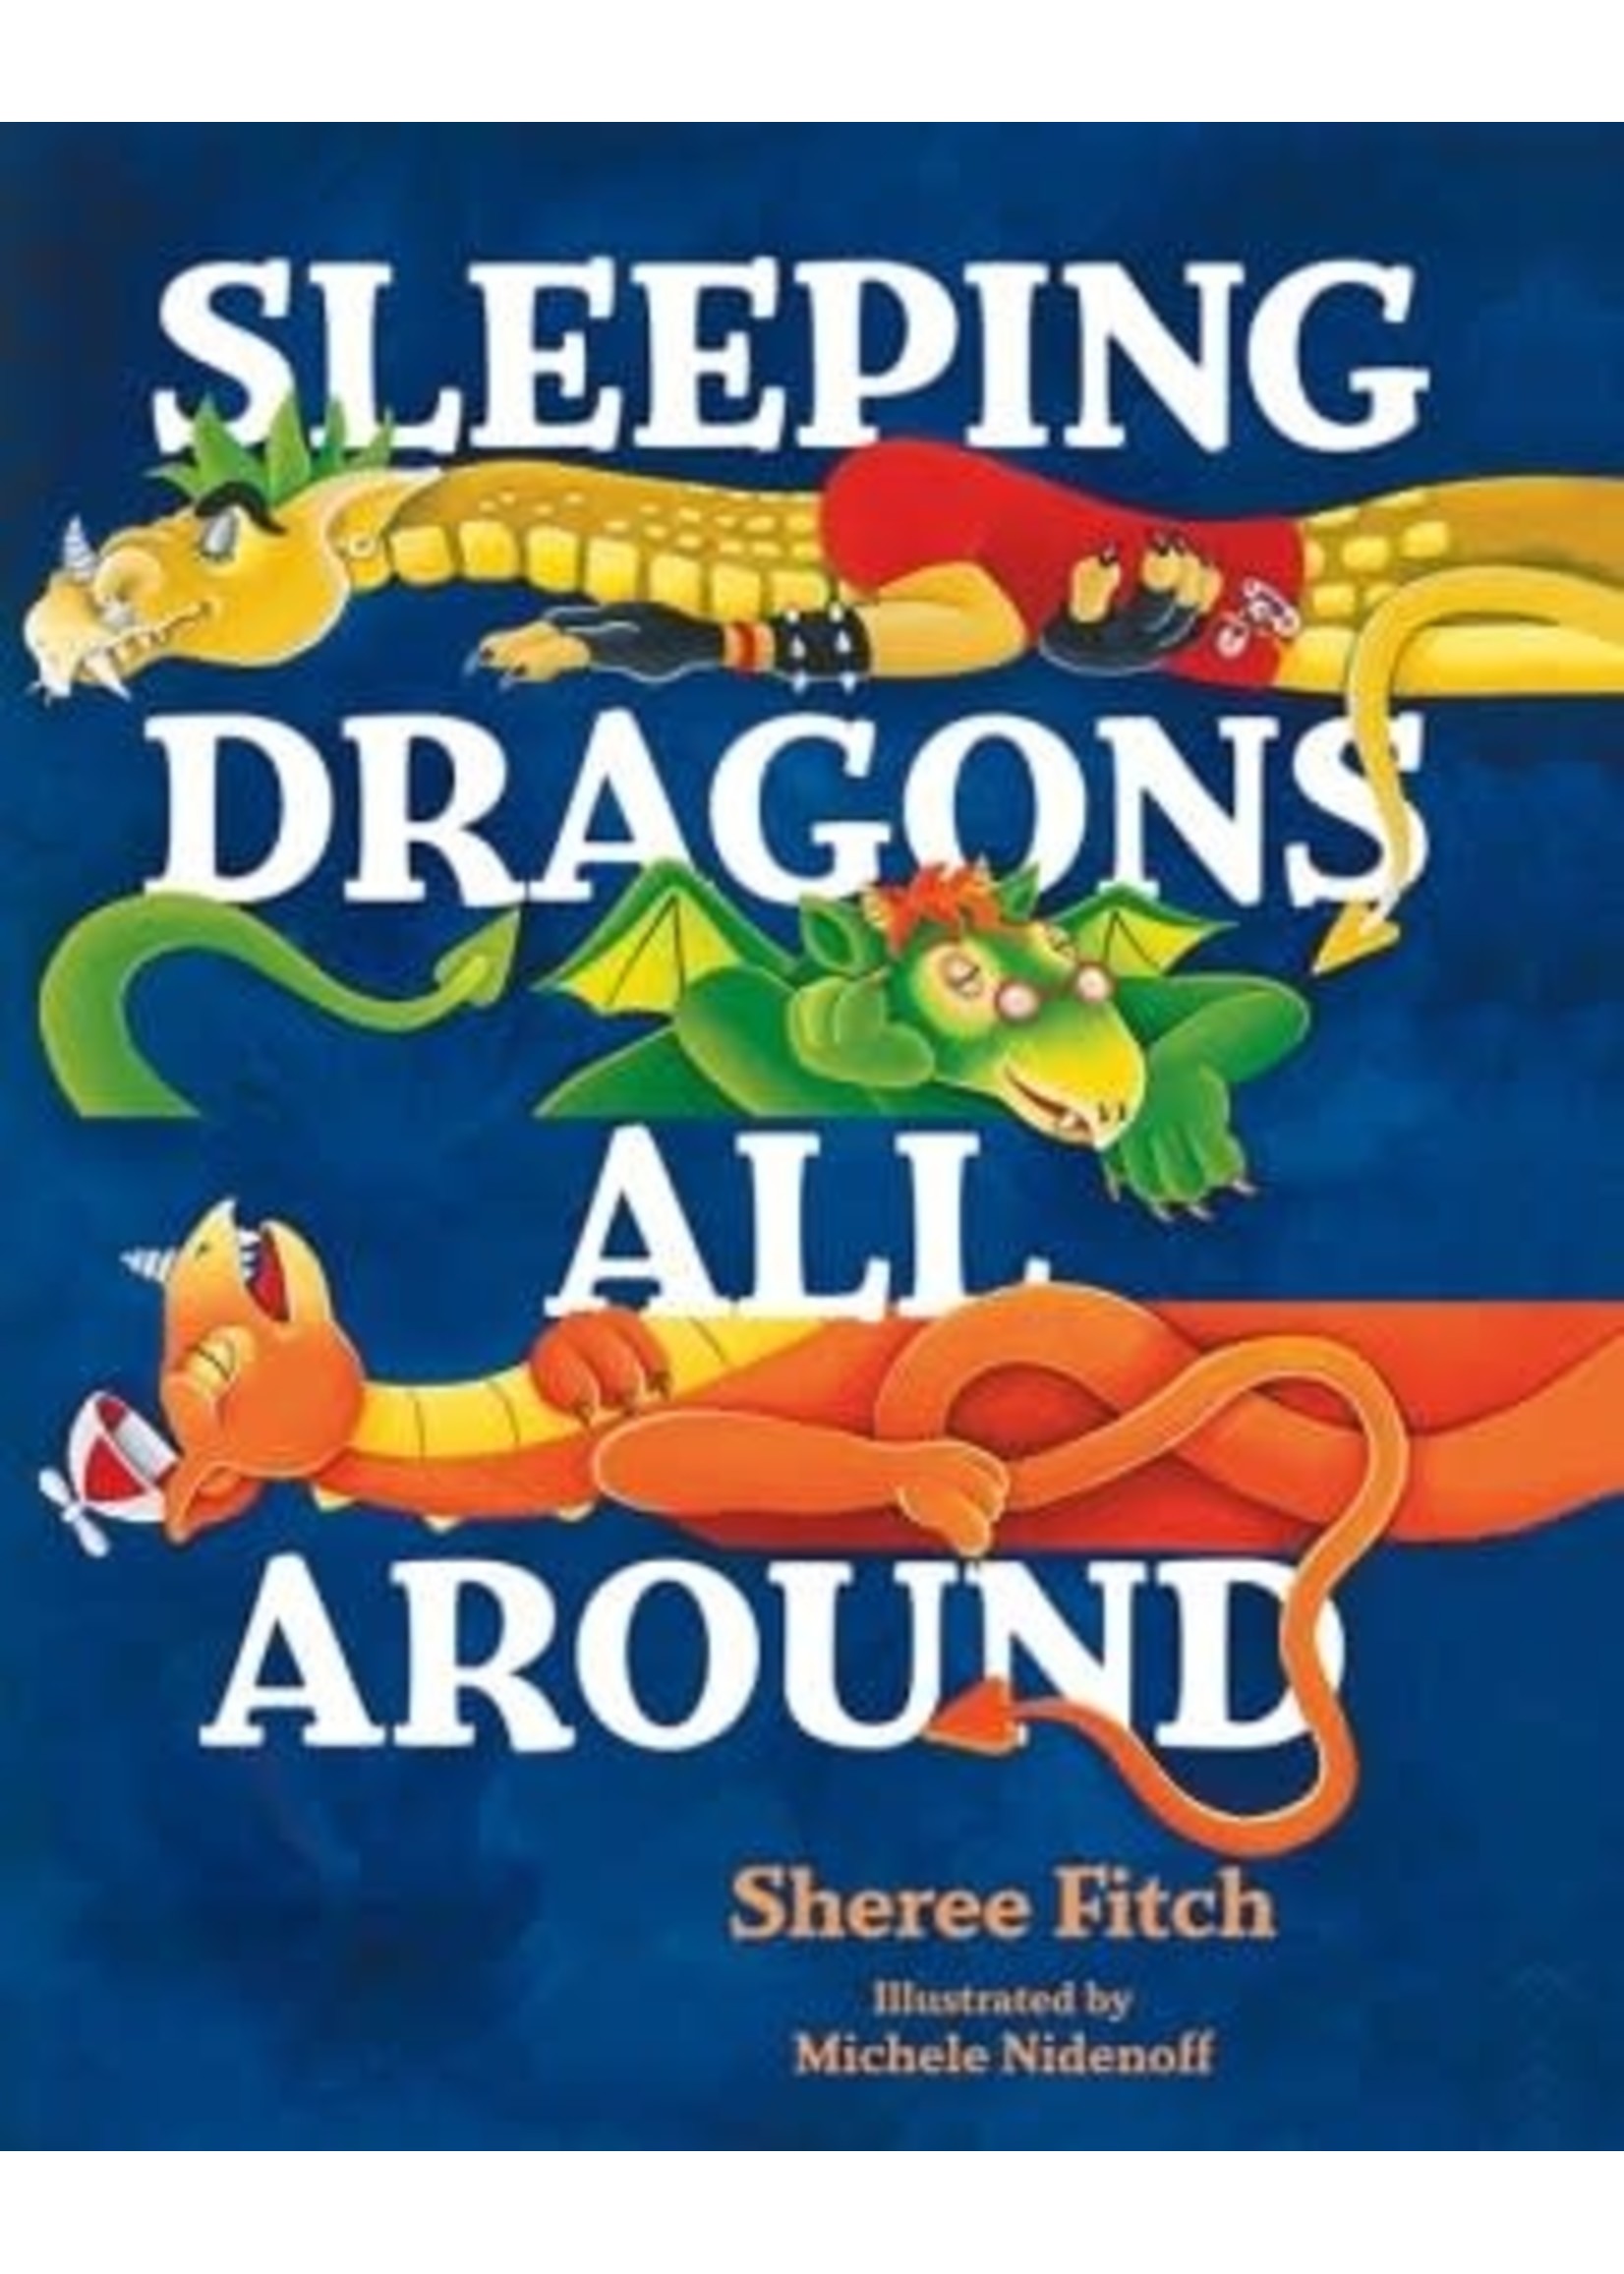 Sleeping Dragons All Around by Sheree Fitch